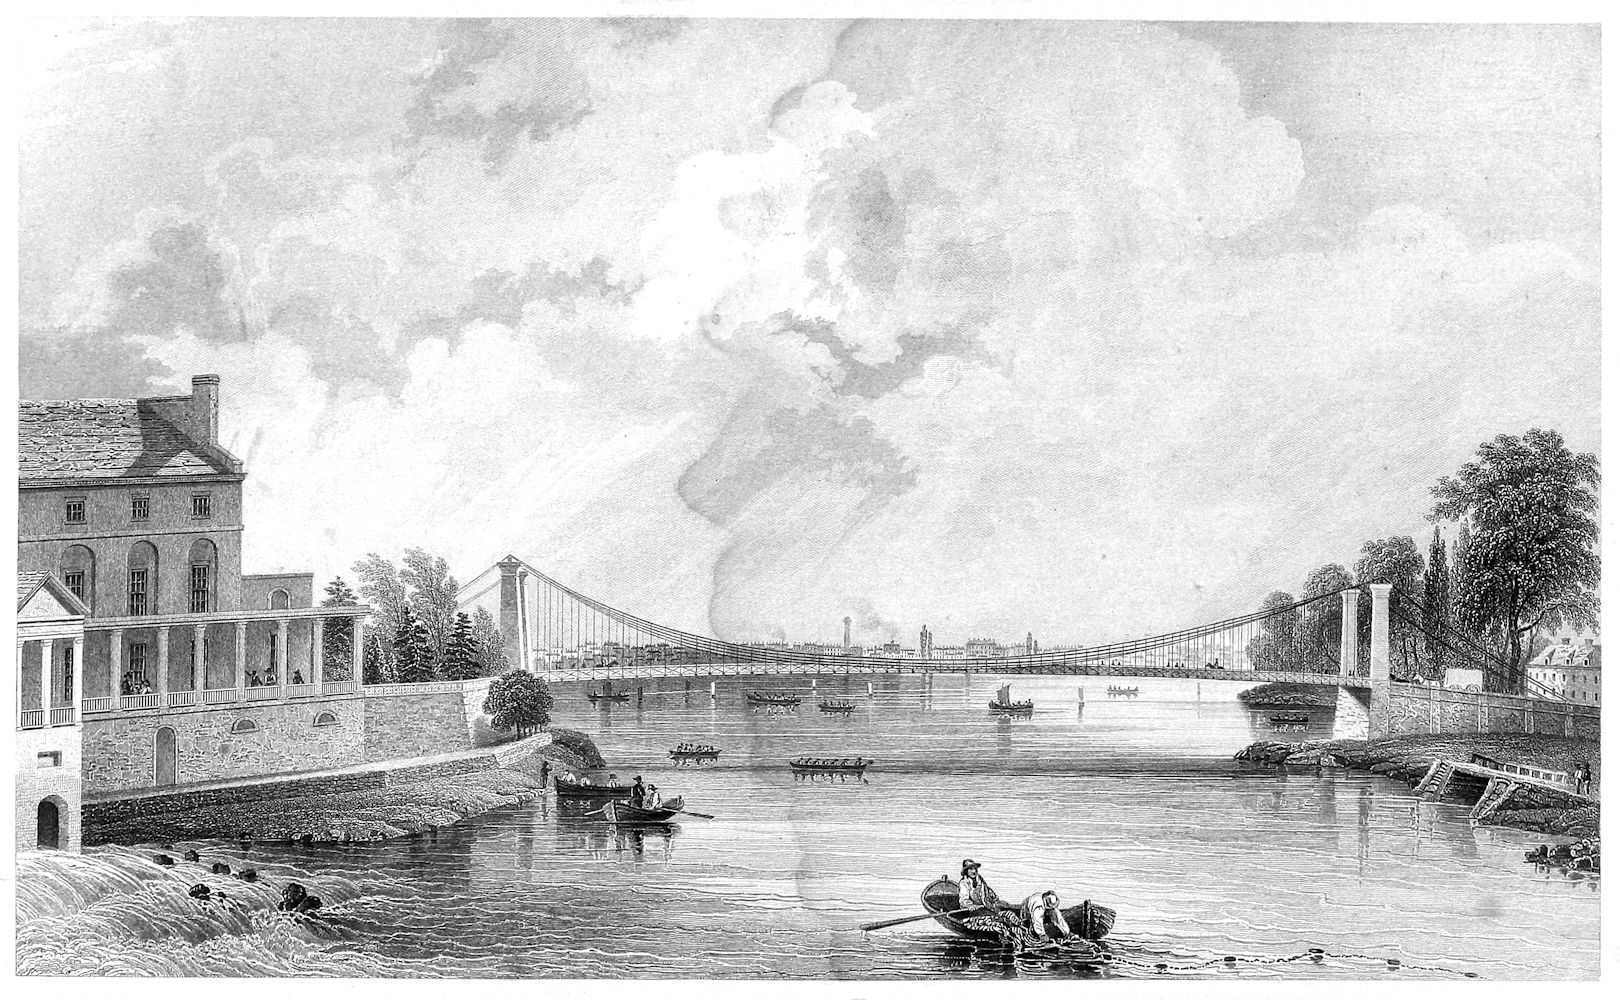 view of a suspension bridge with various boats in the water